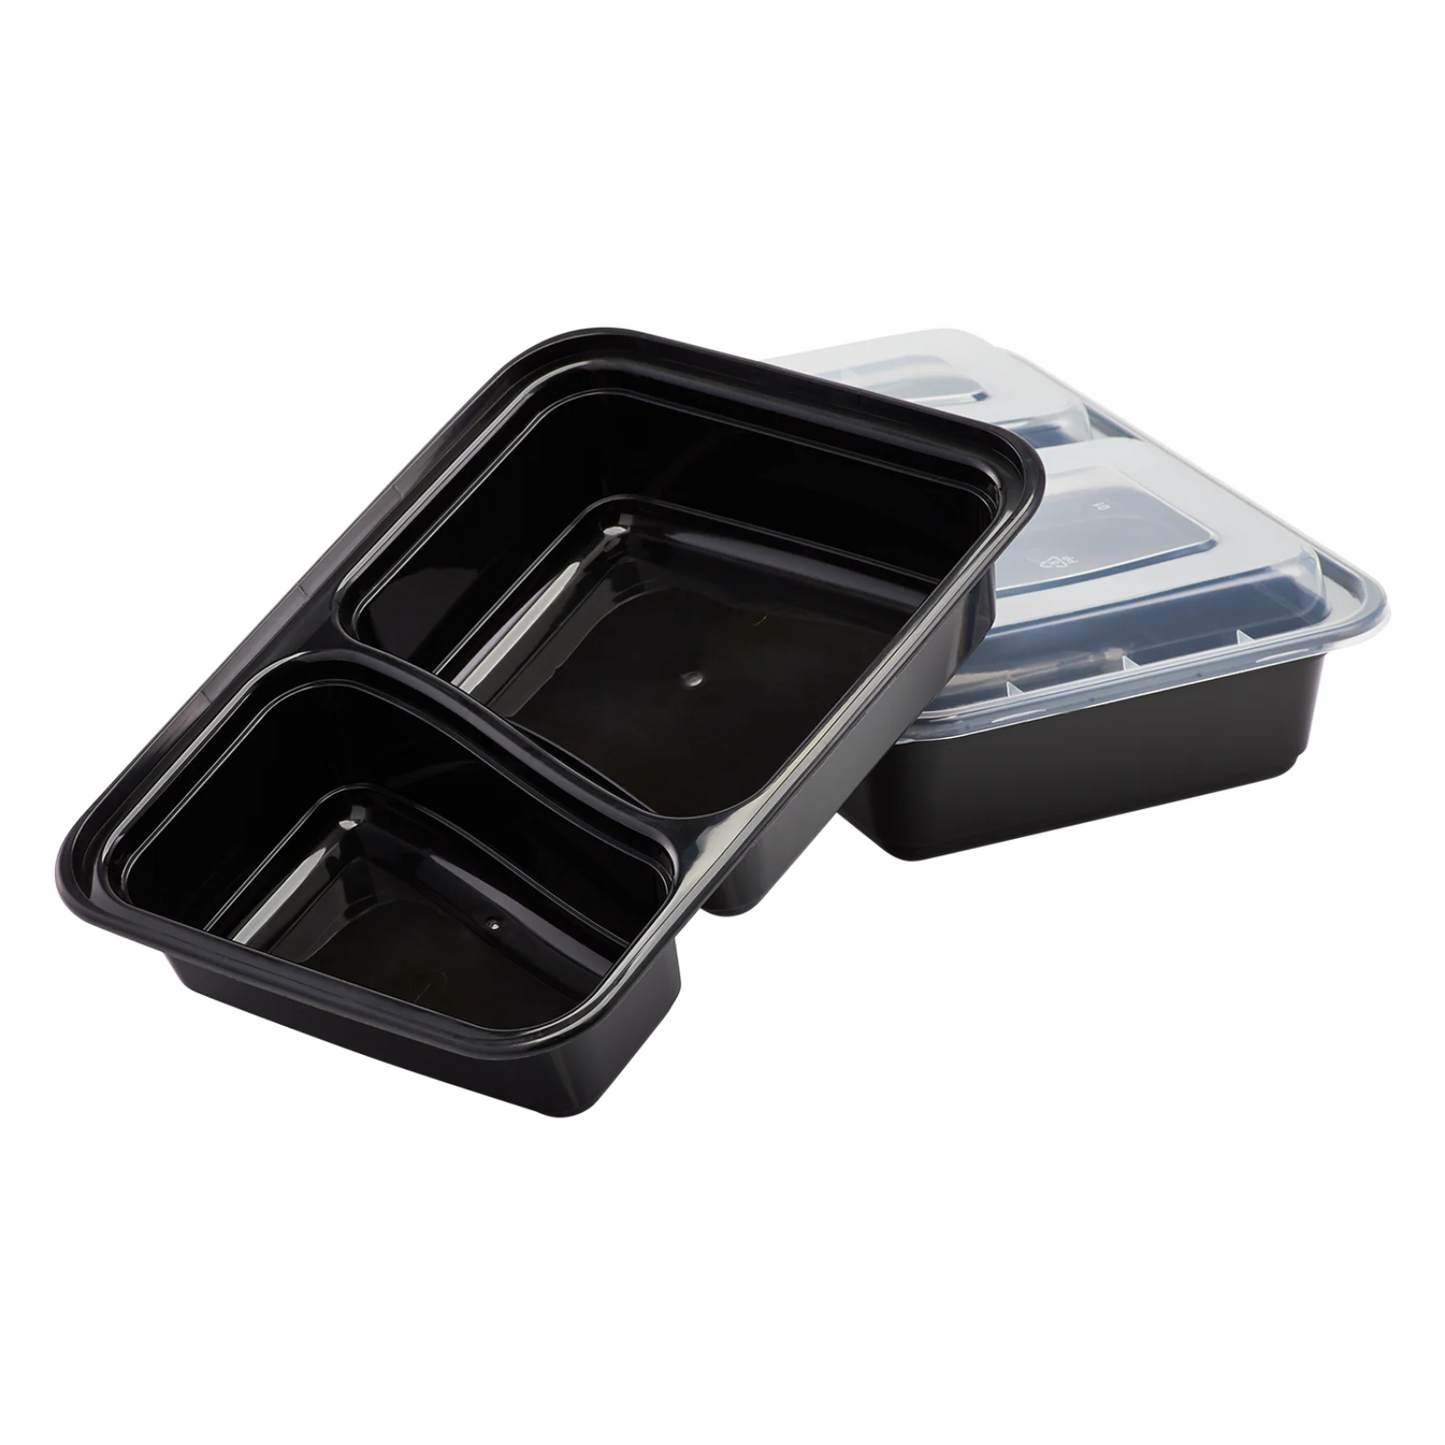 *BULK* 30oz Black Rectangular 2 Section MealPrep Containers With Clear Lids Food Storage & Serving VeZee   